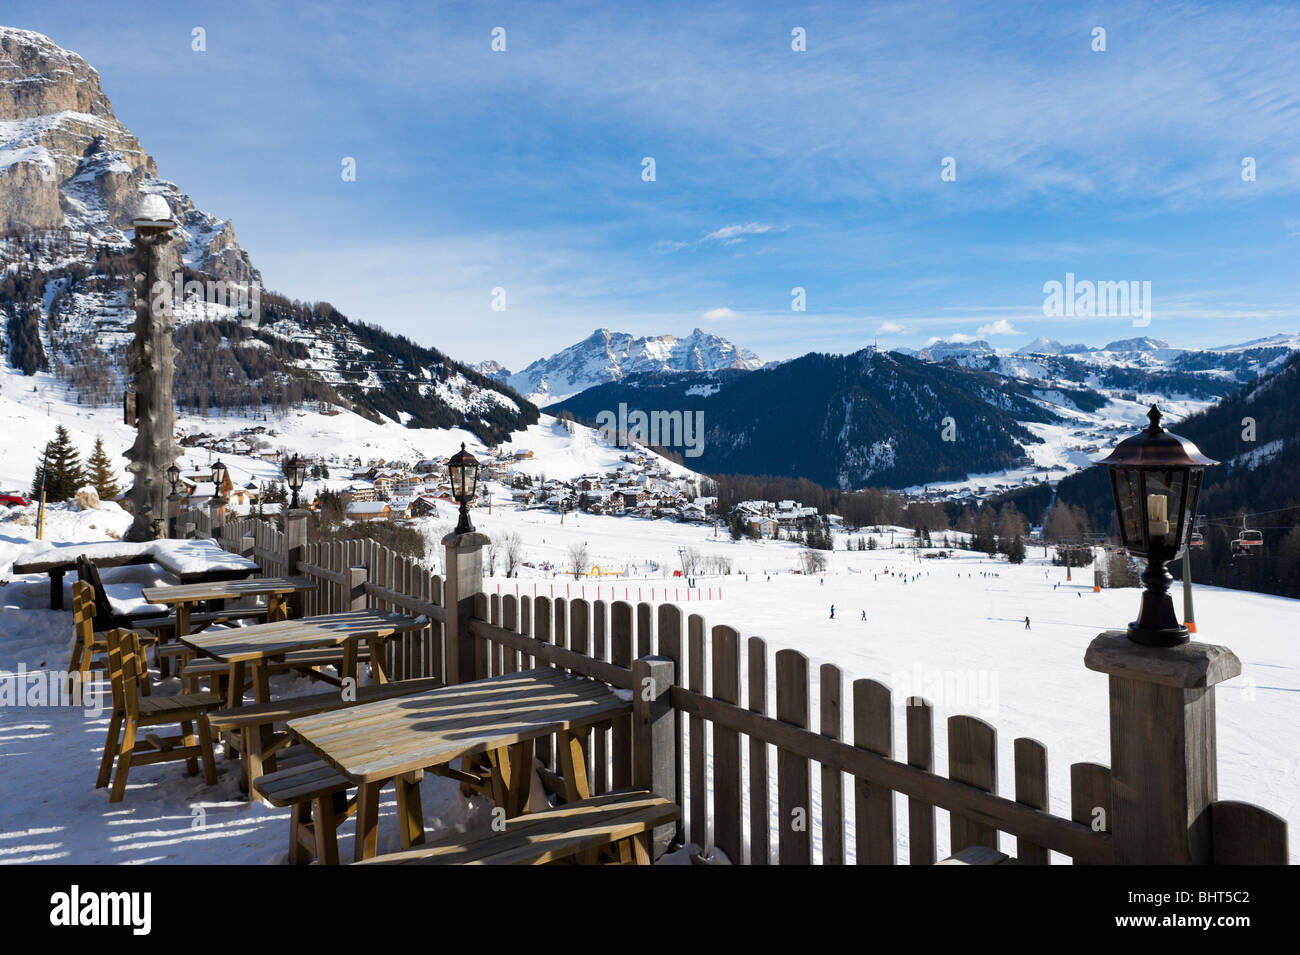 Hotel terrce with a view over the resort of Colfosco with Corvara in the distance, Sella Ronda Ski Area, Dolomites, Italy Stock Photo